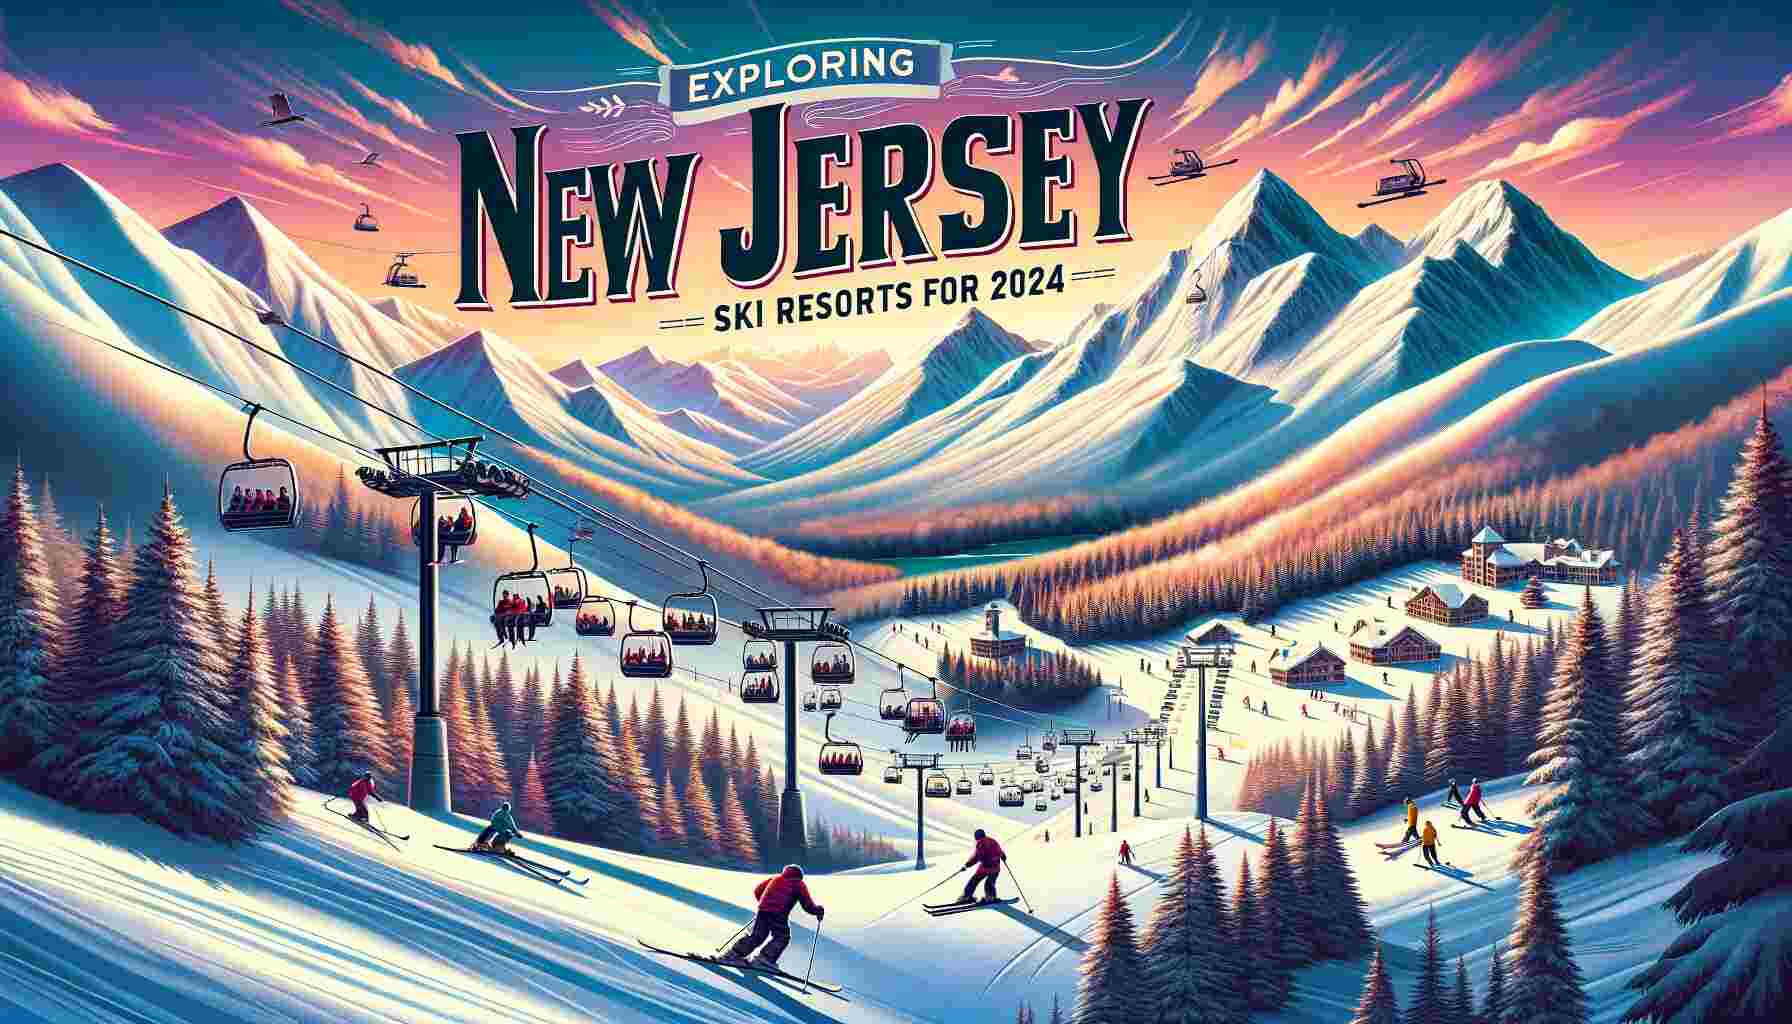 Here's the featured image showcasing New Jersey's best ski resorts for 2024. It depicts a scenic winter landscape with skiers, snowboarders, and the vibrant glow of a sunset over the snowy peaks.